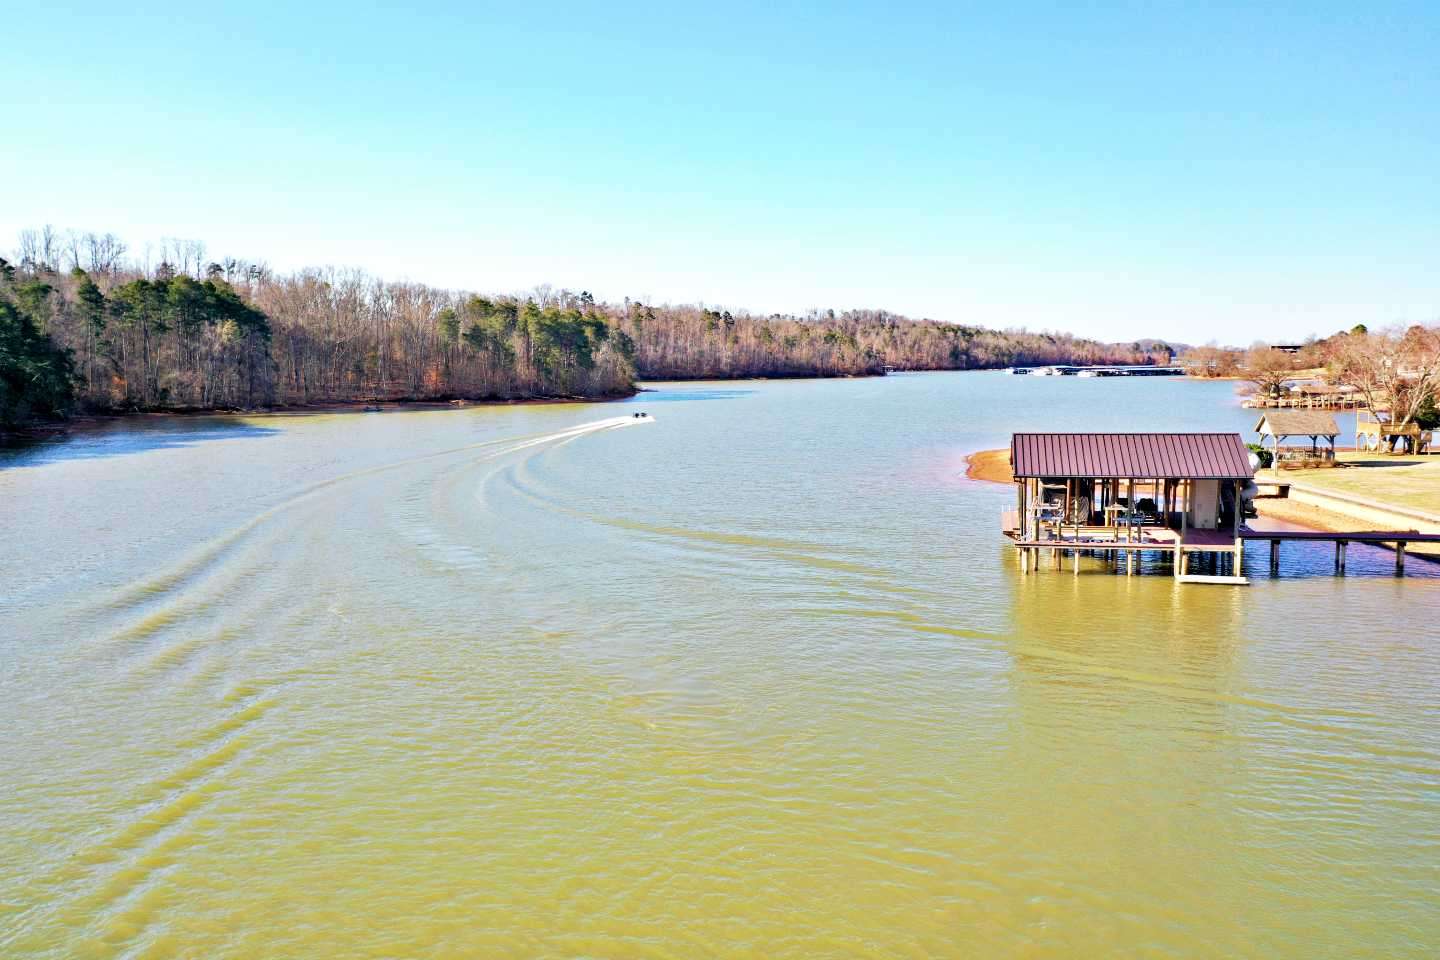 The creek offers plenty of docks, seawalls and rocky banks that are ideal for the sun to warm. 
